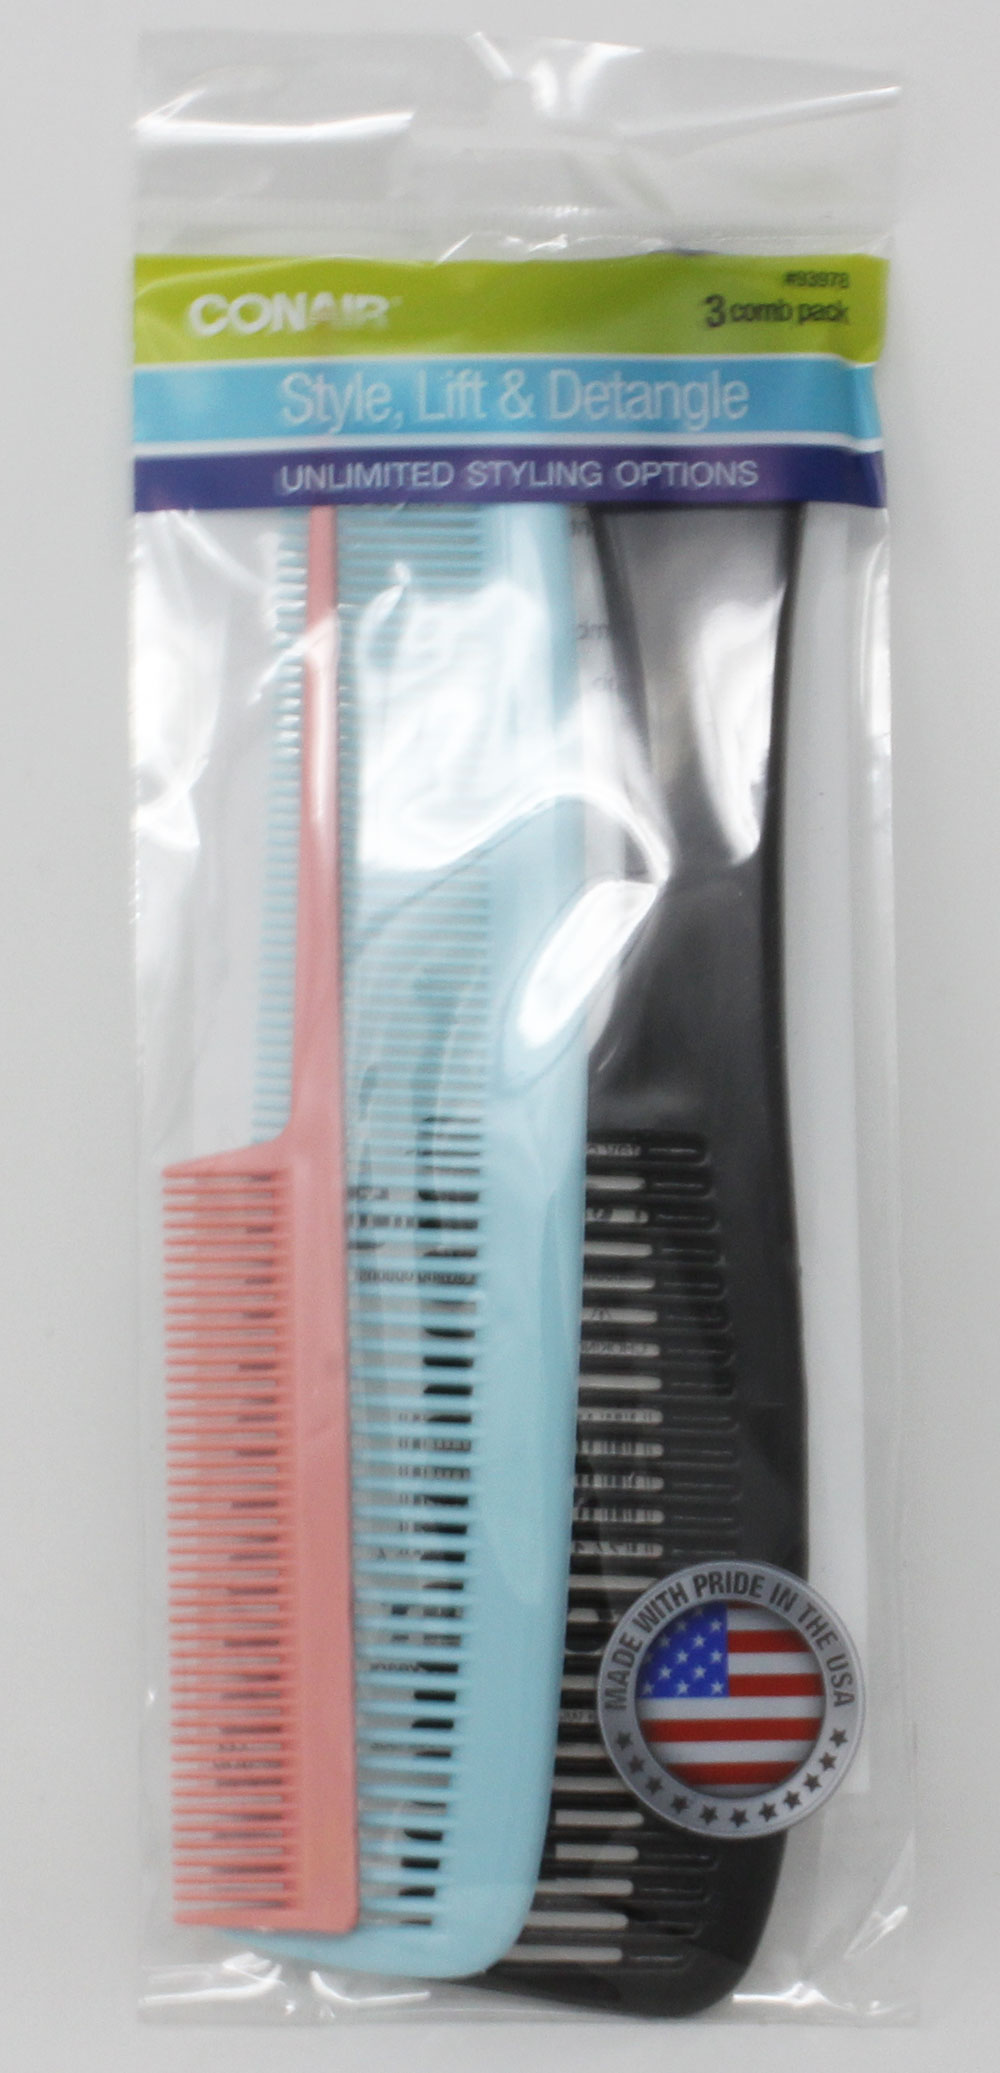 93978 - Conair 3 Pack Assorted Combs - UPC 074108939784 - Pack: 48 (16-3's)